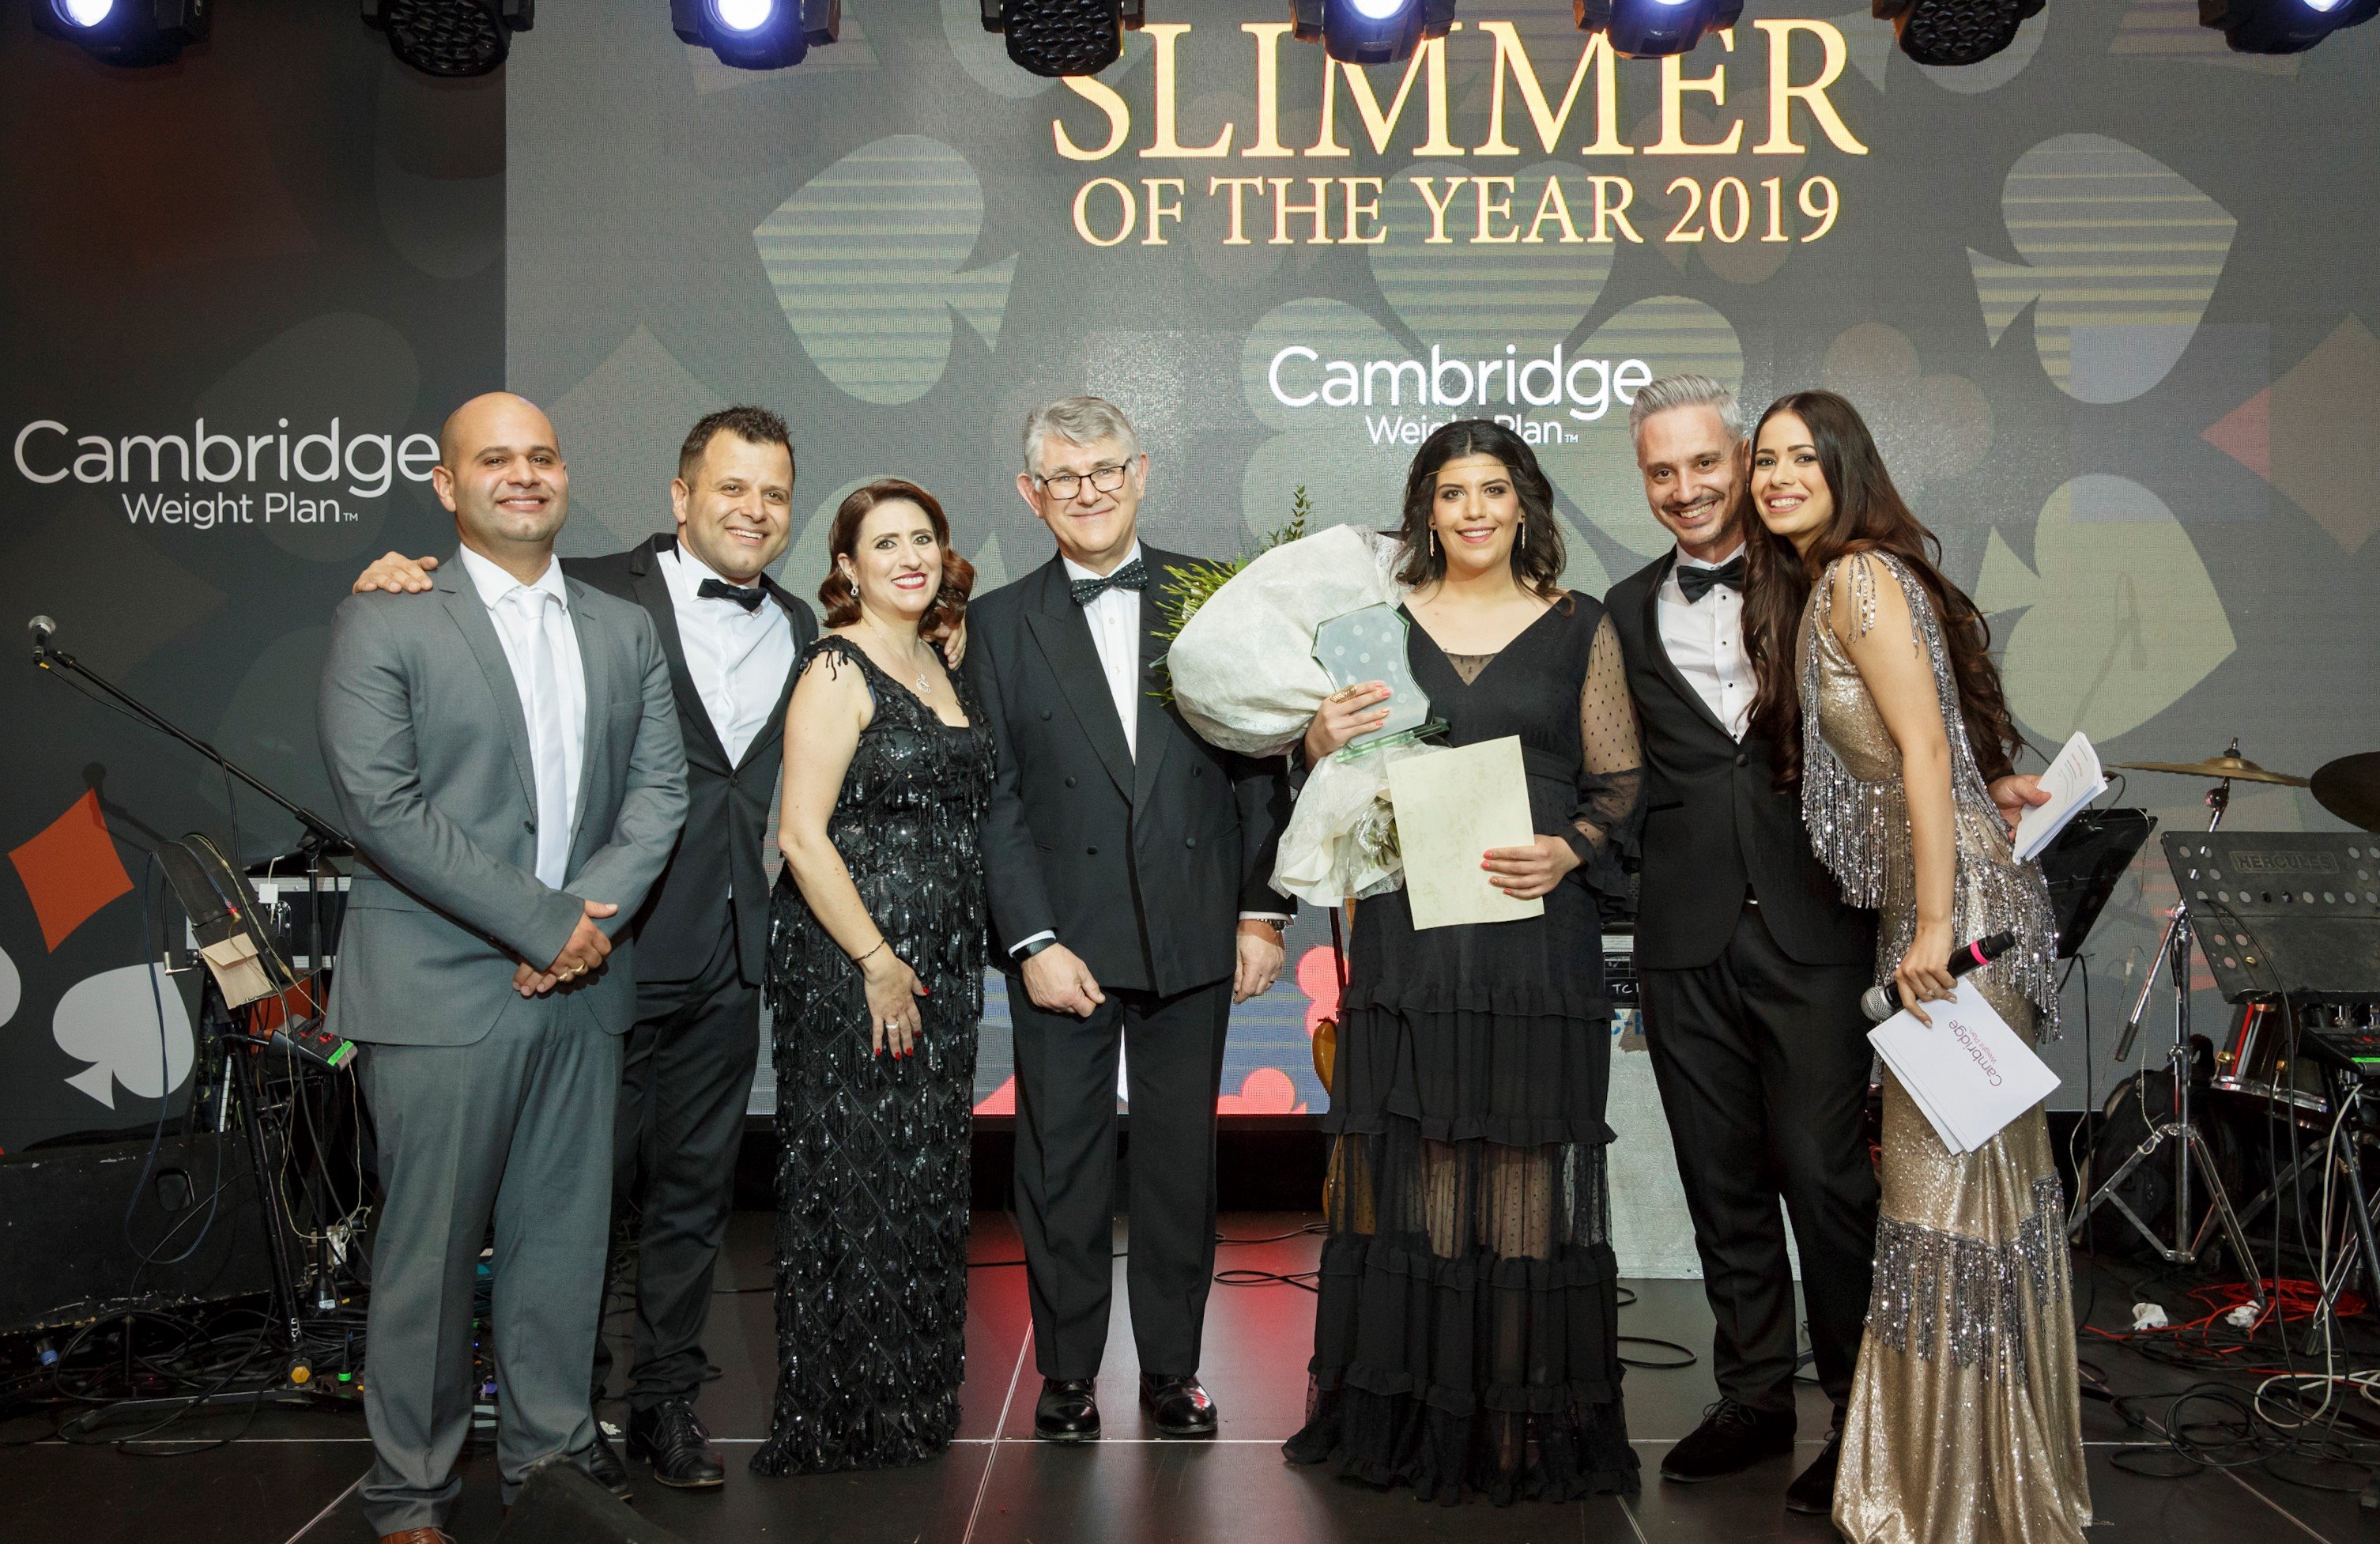 Slimmer Of The Year Awards 2019 - An evening to remember, by Cambridge Weight Plan Cyprus